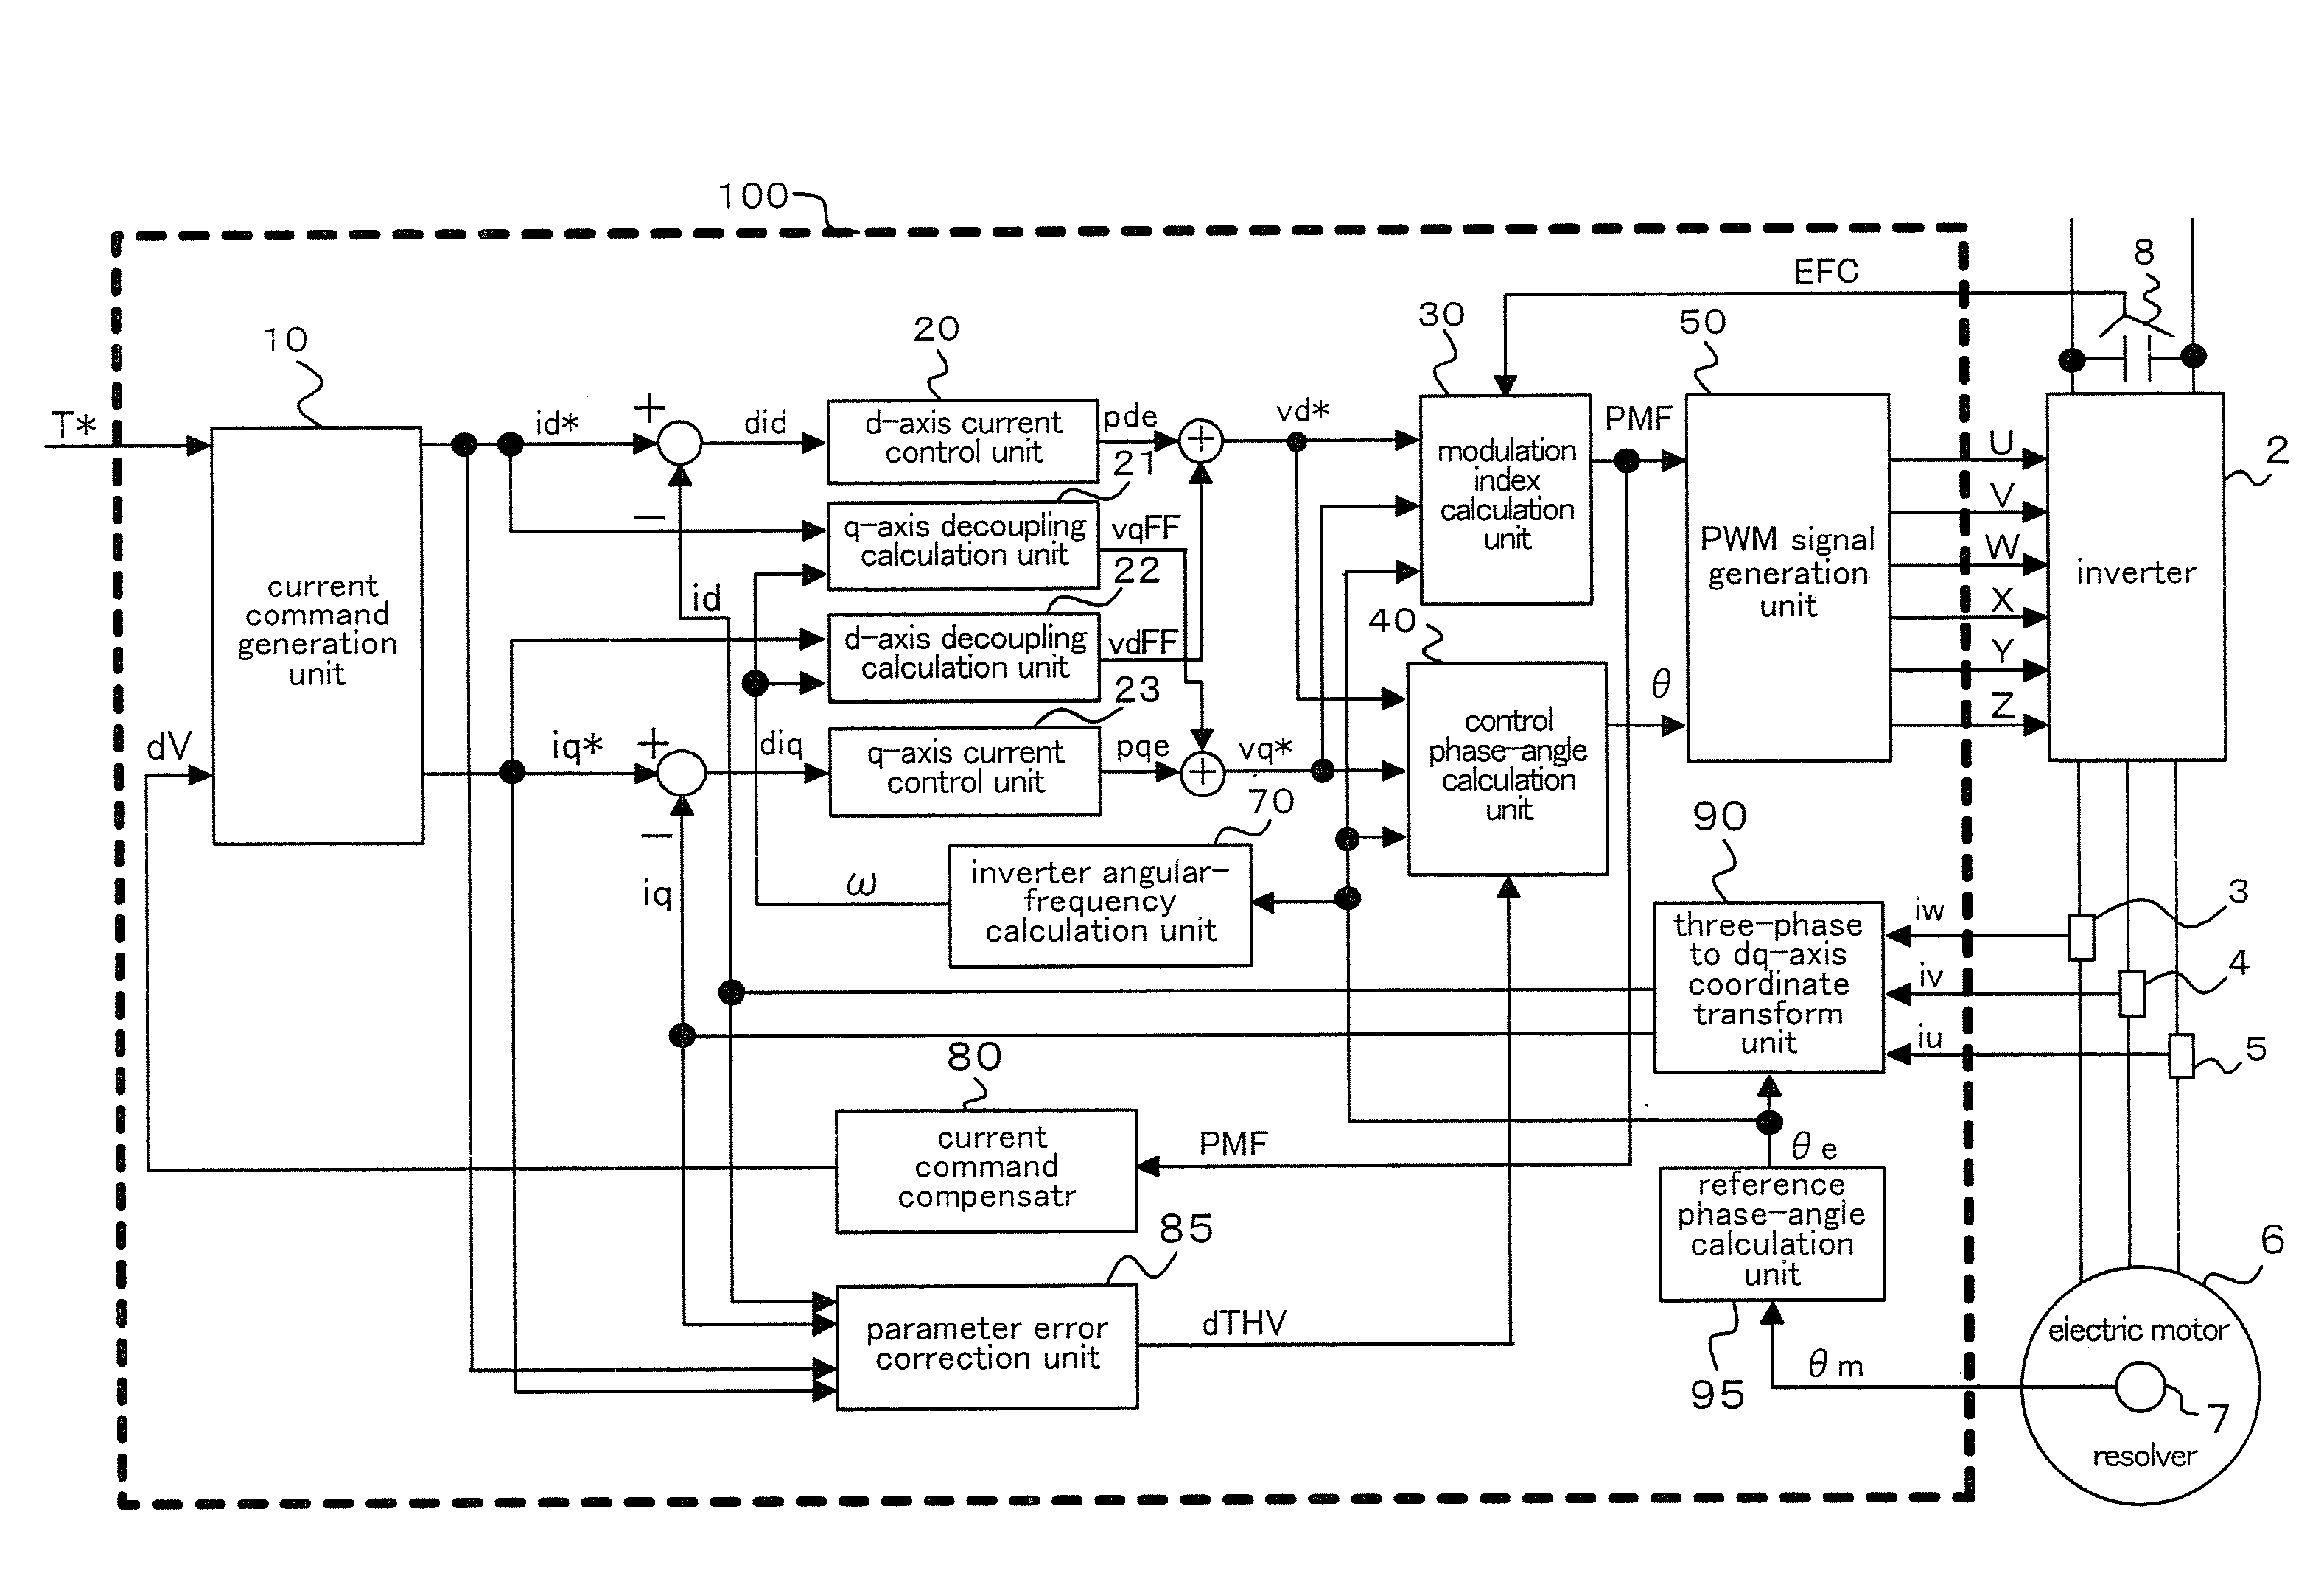 Vector controller for permanent-magnet synchronous electric motor